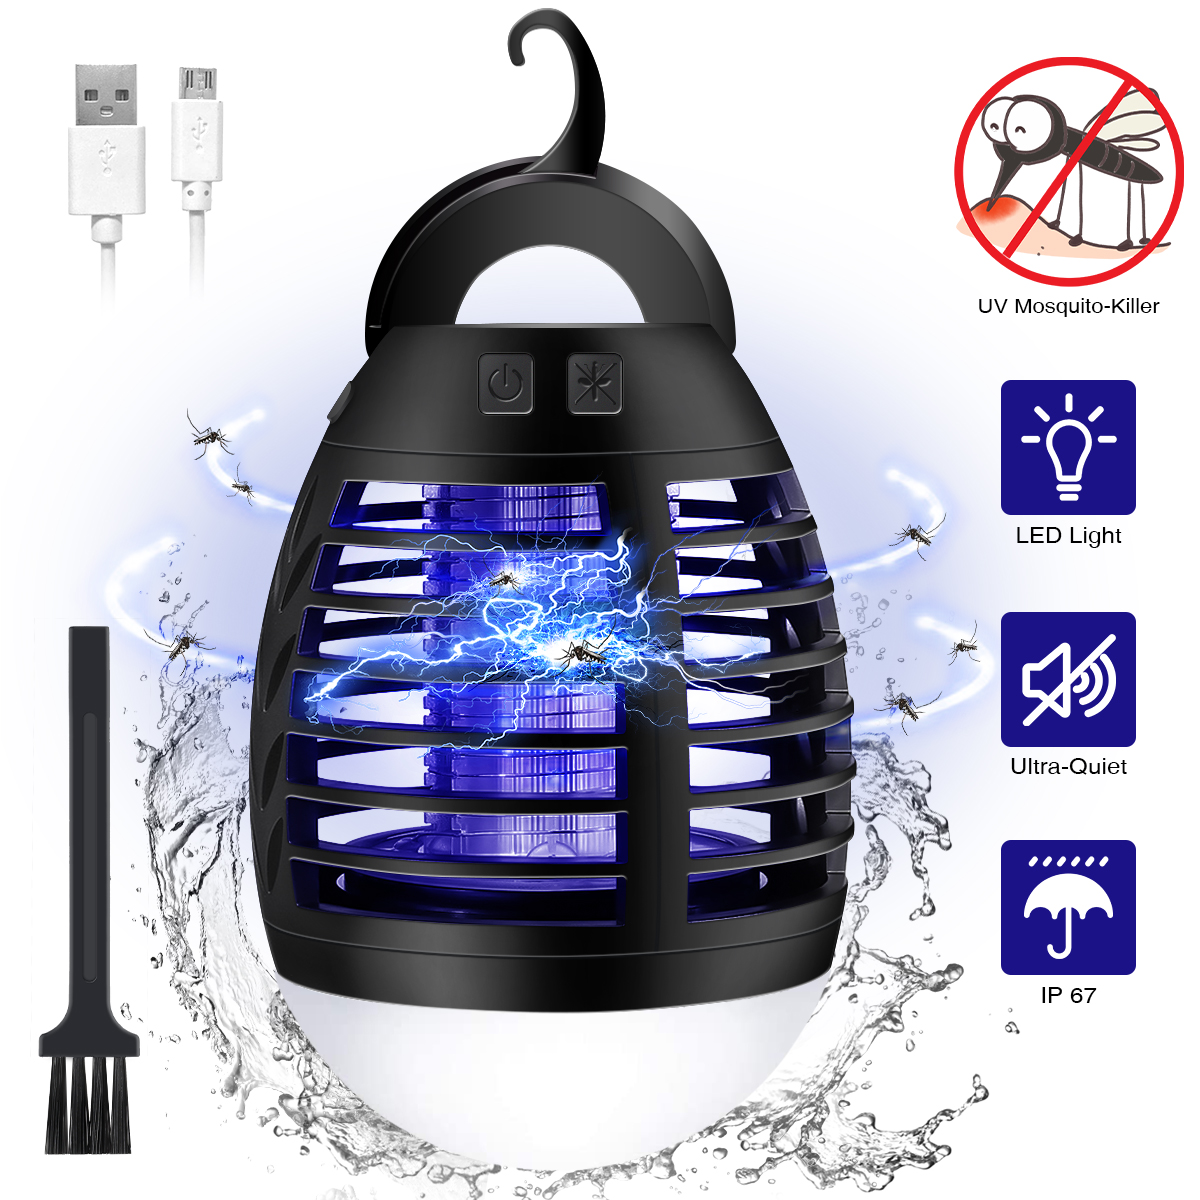 Elfeland-5W-Electric-Mosquito-Killer-Lamp-USB-Powered-Trap-Gnat-with-Hanger-for-Indoor-Outdoor-1710190-1